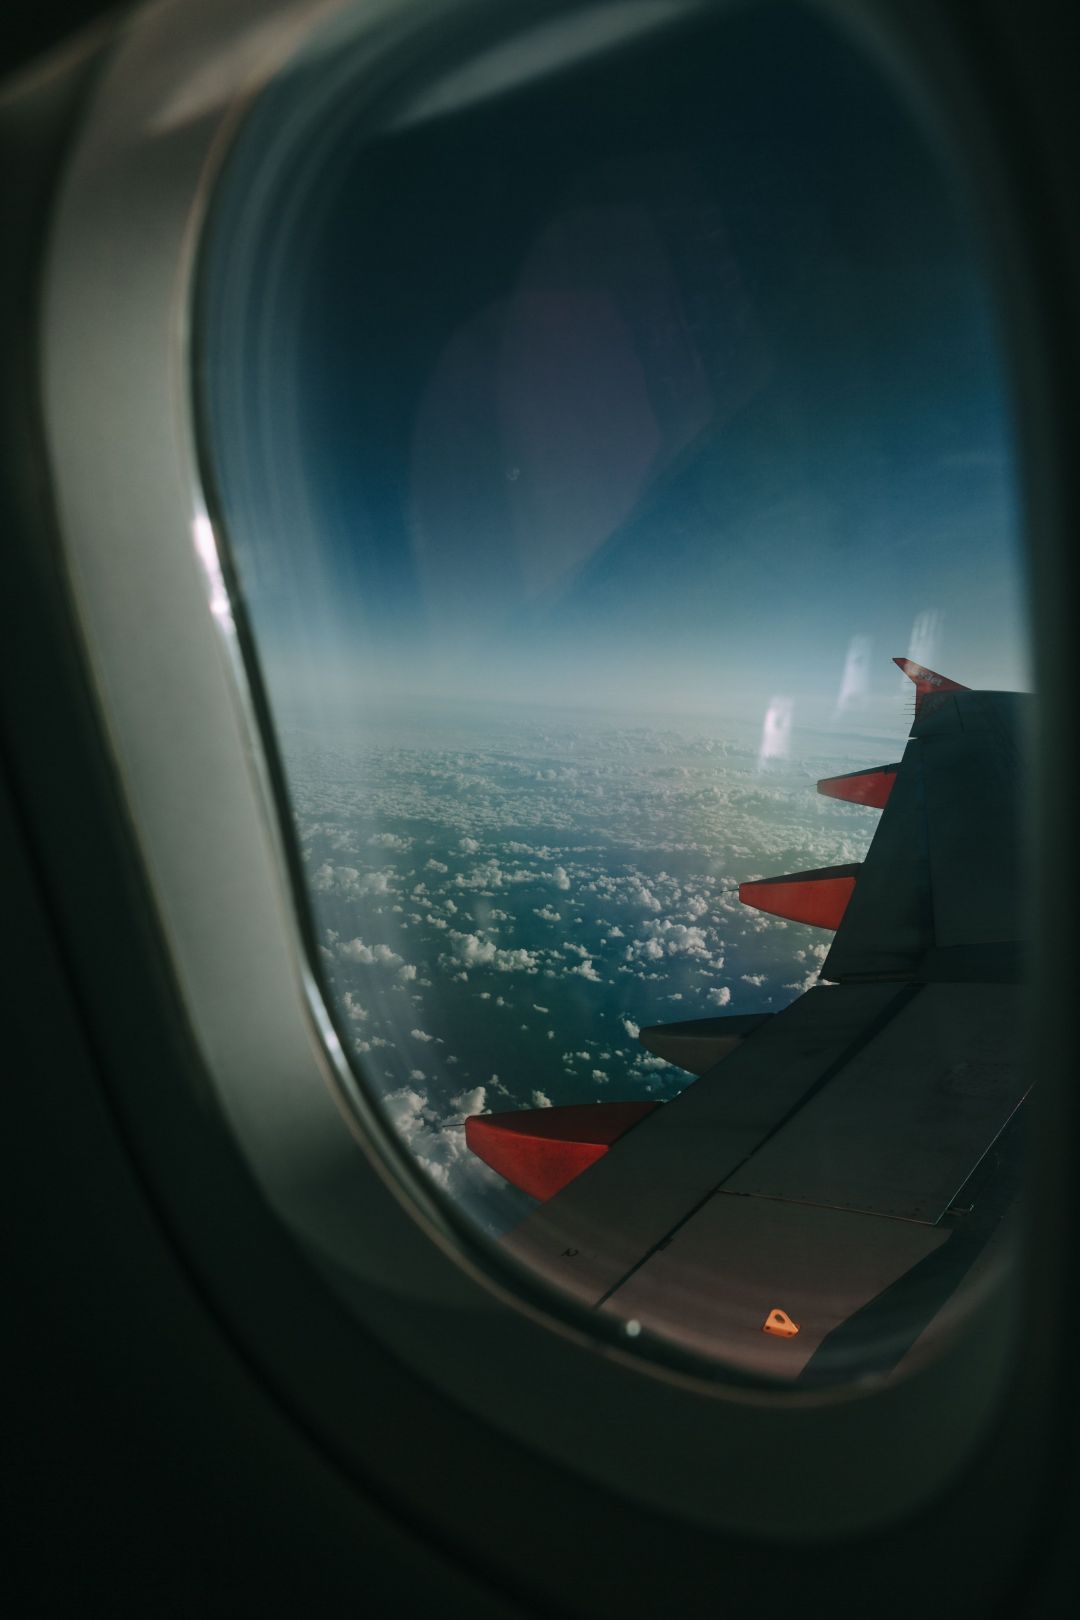 The view from a plane window. - Airplane